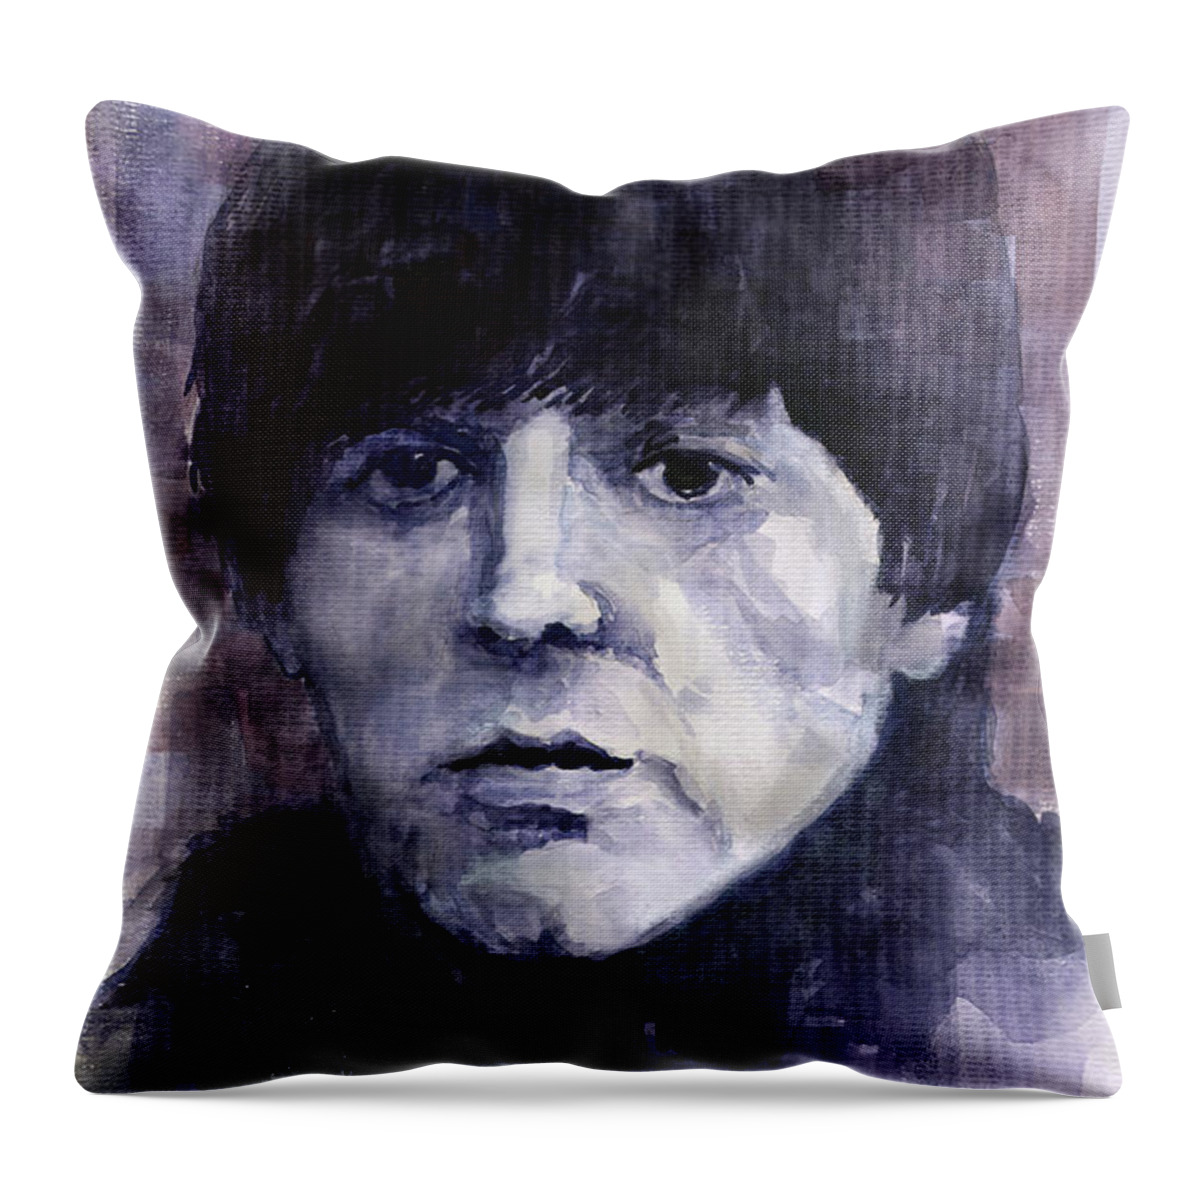 Watercolor Throw Pillow featuring the painting The Beatles Paul McCartney by Yuriy Shevchuk